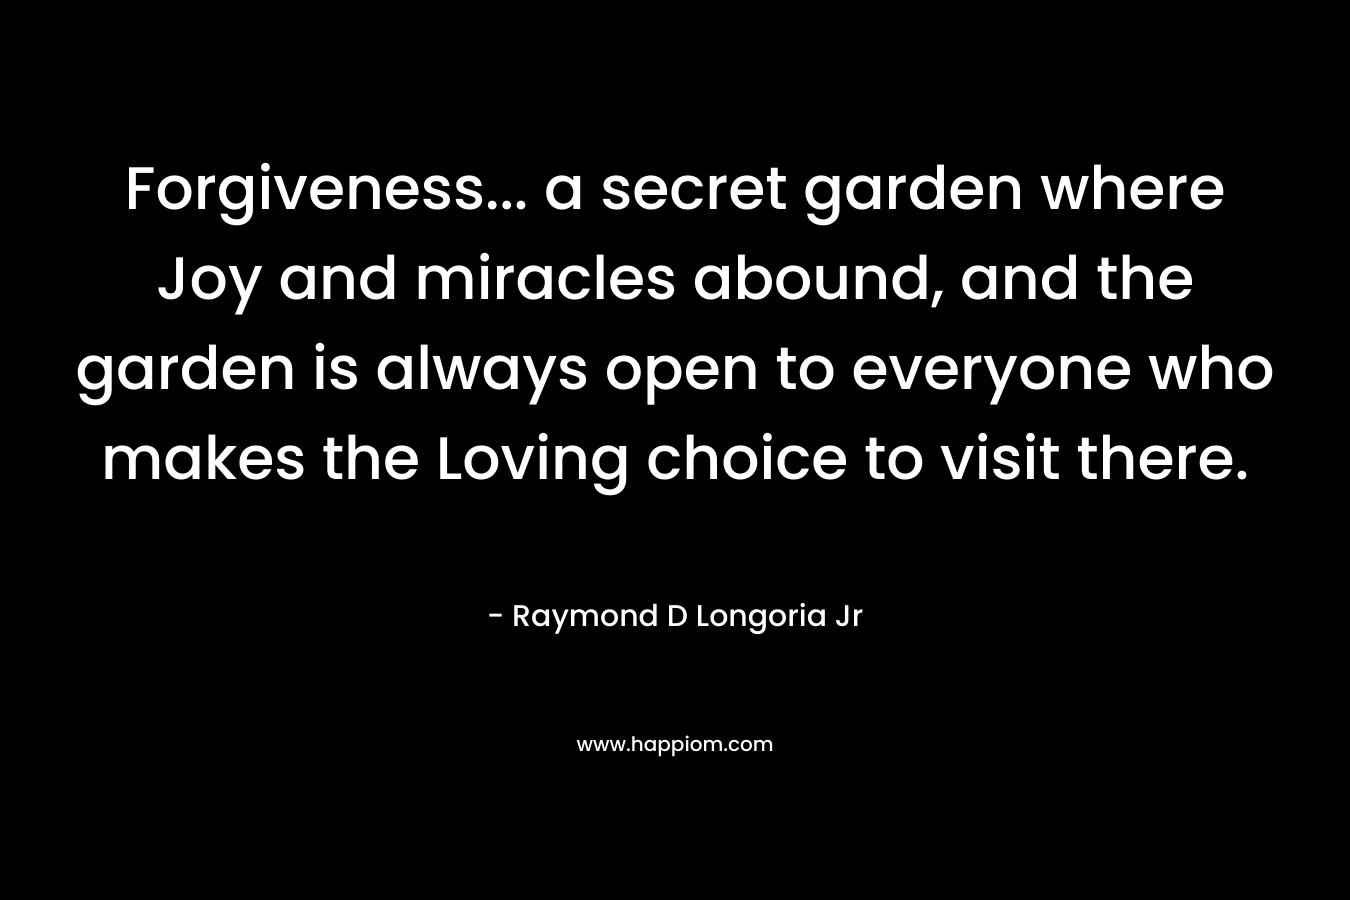 Forgiveness... a secret garden where Joy and miracles abound, and the garden is always open to everyone who makes the Loving choice to visit there.